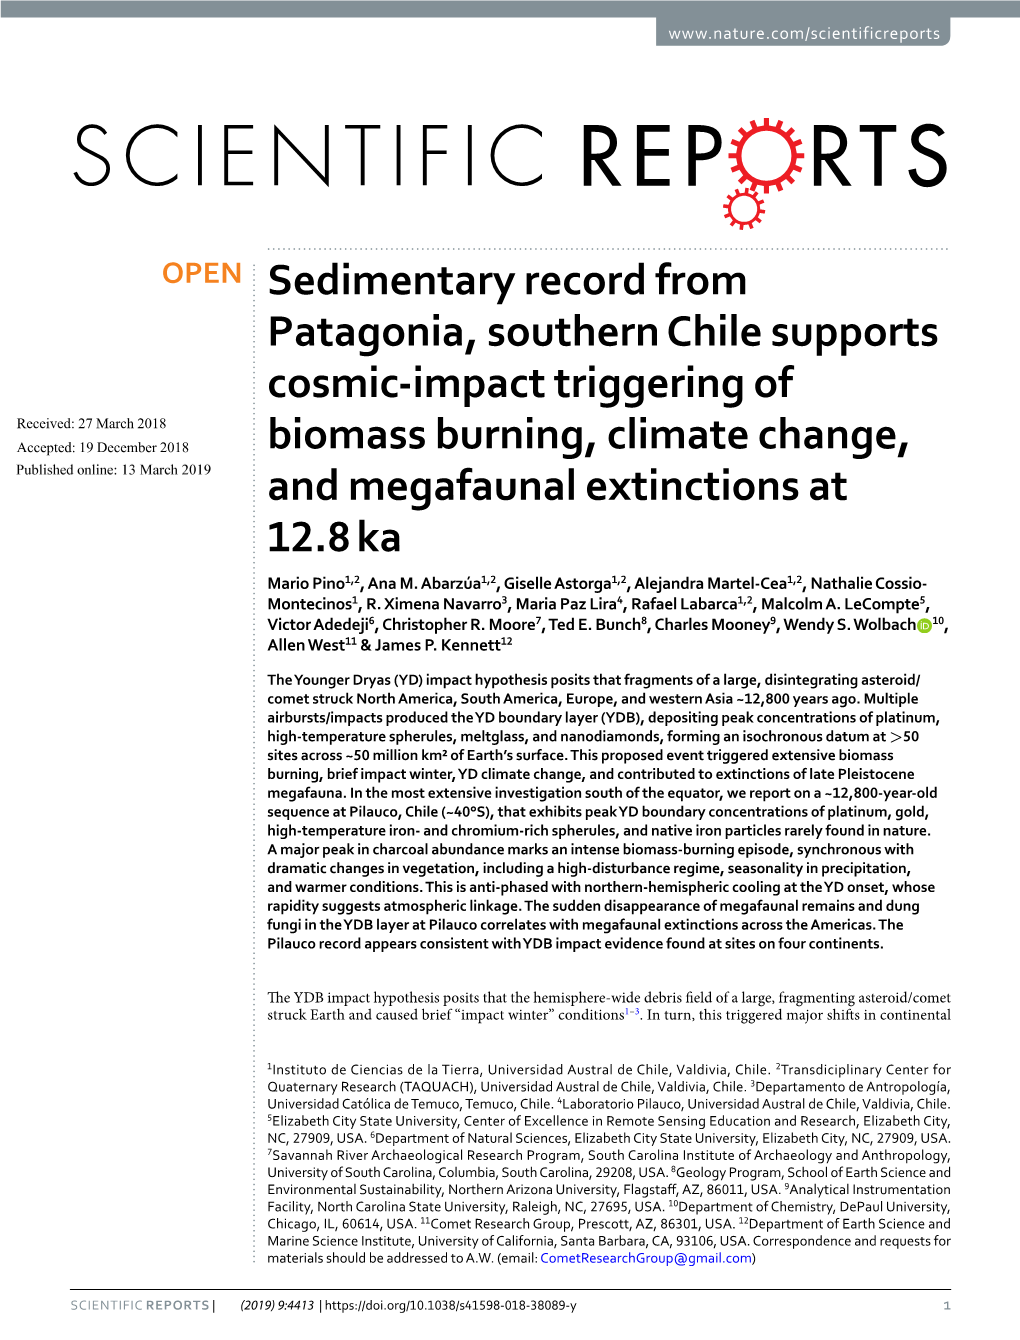 Sedimentary Record from Patagonia, Southern Chile Supports Cosmic